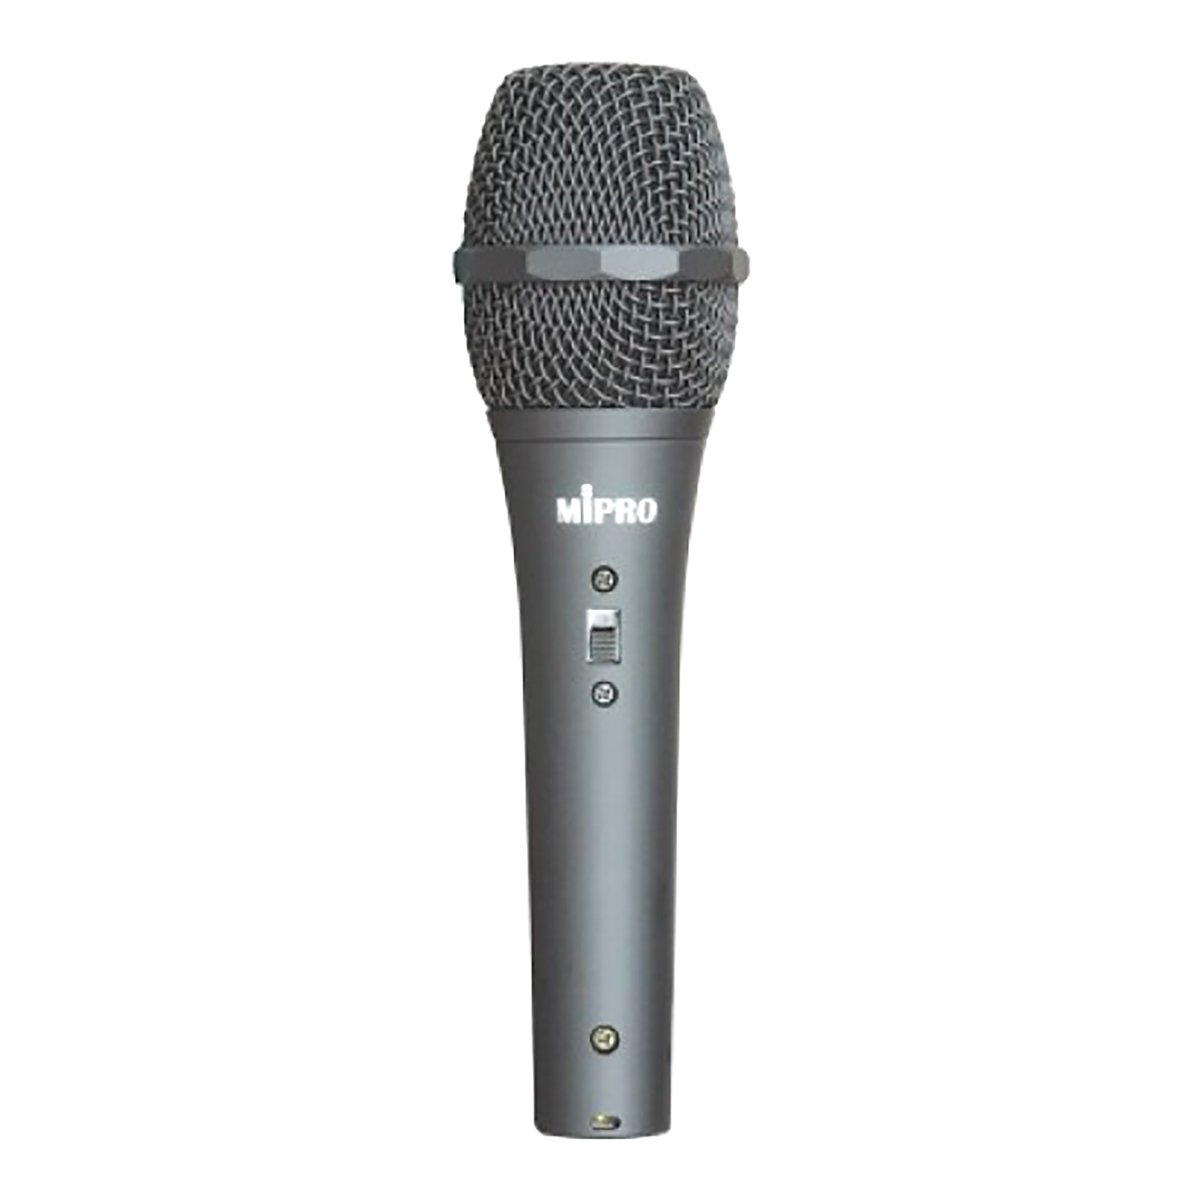 Mipro Dynamic Microphone MM107